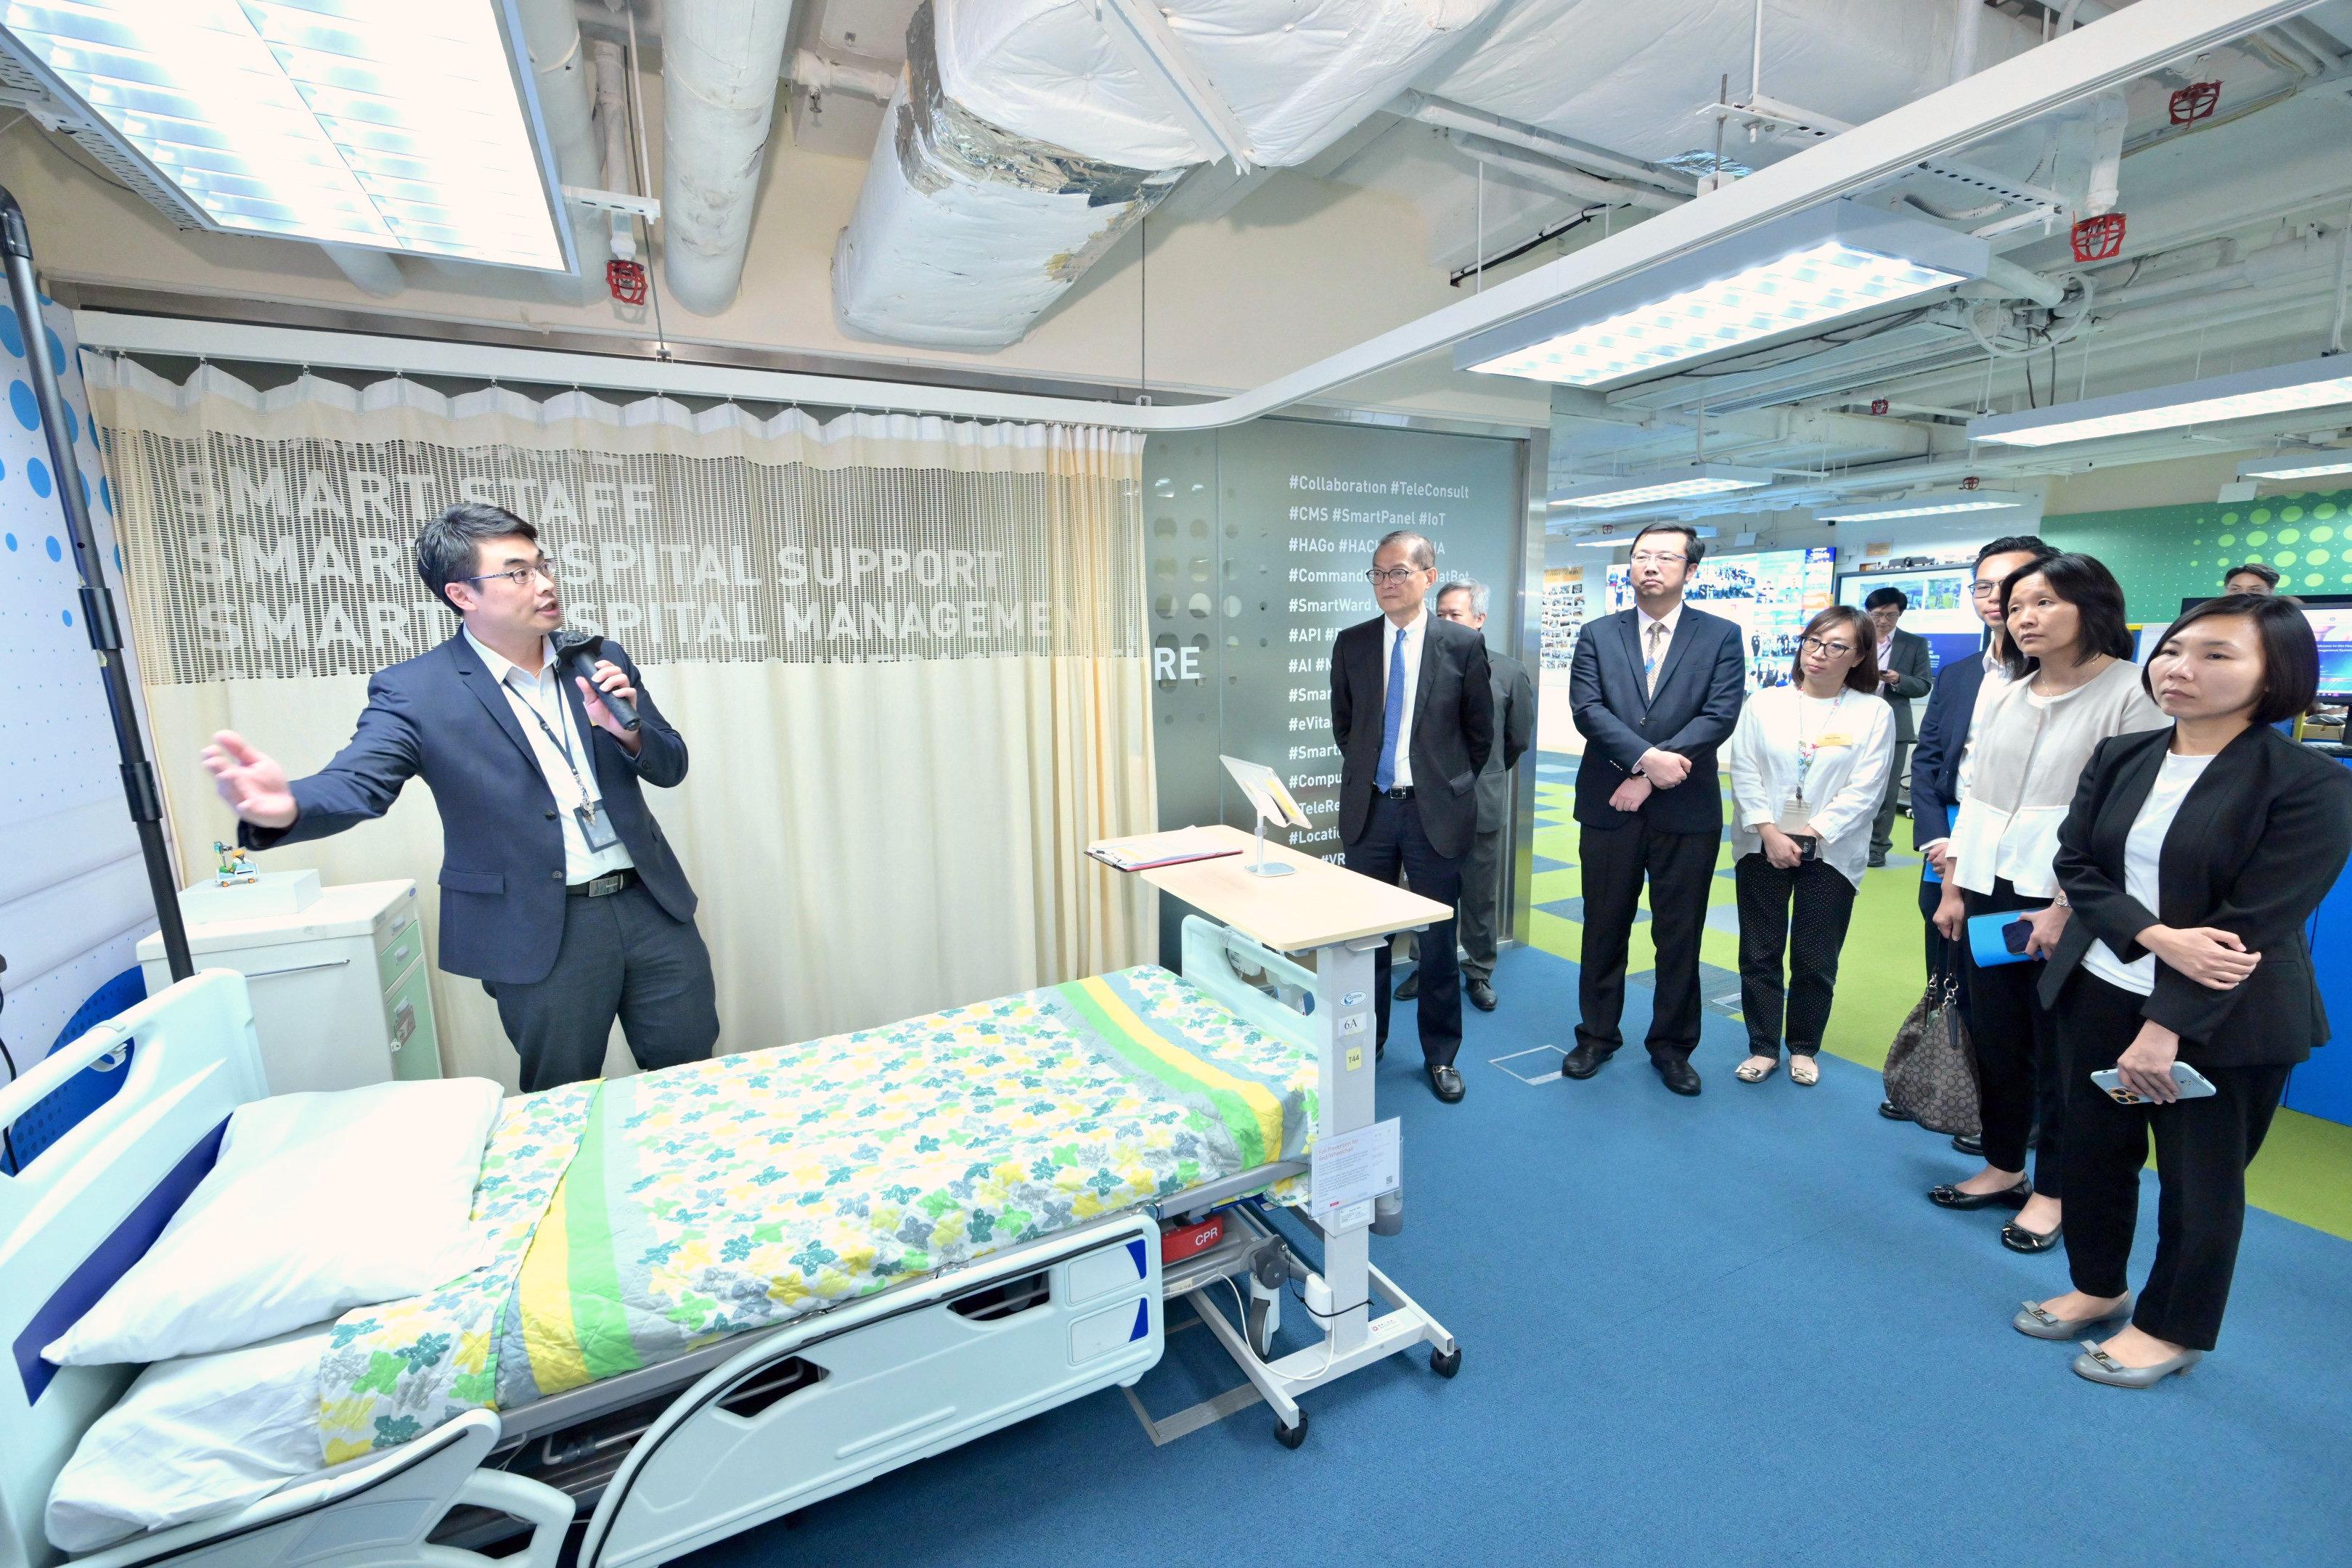 The Secretary for Health, Professor Lo Chung-mau, visited the IT Innovation Lab of the Hospital Authority (HA) this afternoon (July 14). Photo shows Professor Lo (second left) receiving a briefing by HA staff on the development progress of smart hospitals. Looking on are the Director (Quality and Safety) of the HA, Dr Michael Wong (fourth left), and the Chief Medical Informatics Officer of the HA, Dr Joanna Pang (first right).